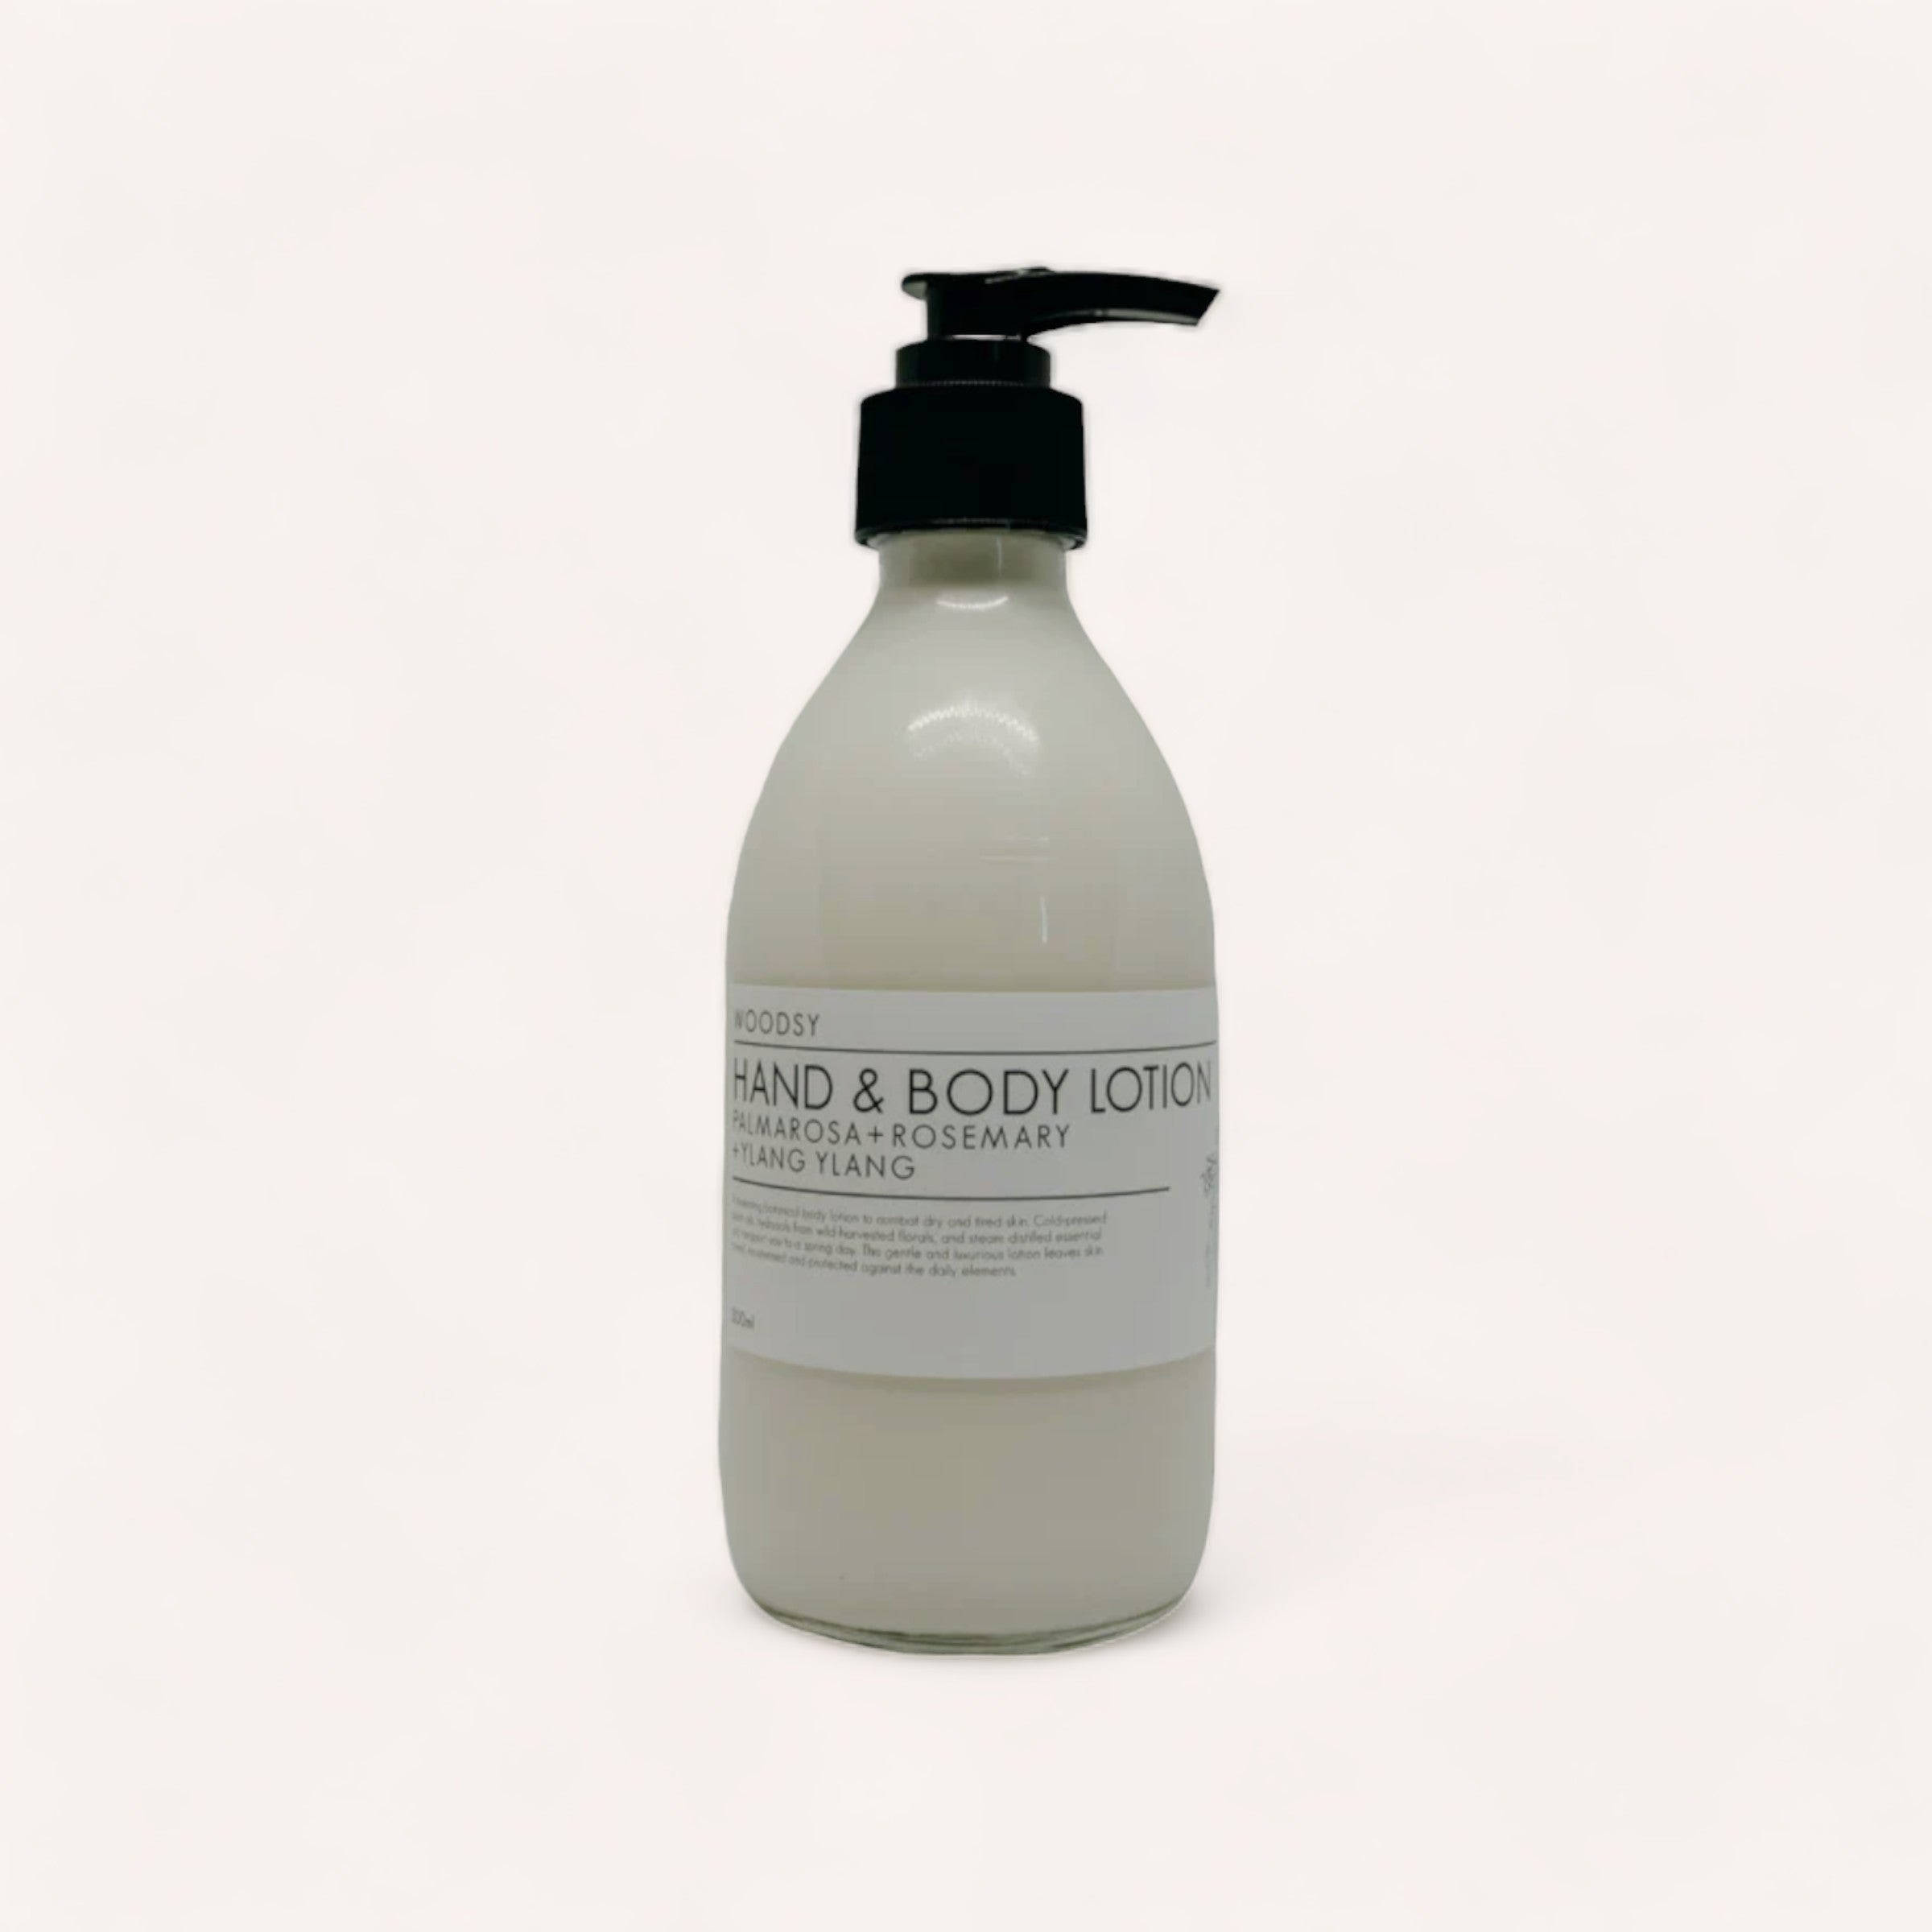 A pump bottle of Hand & Body Lotion - Palmarosa & Ylang Ylang by Woodsy Botanics with lavender and rosemary essential oils on a white background.